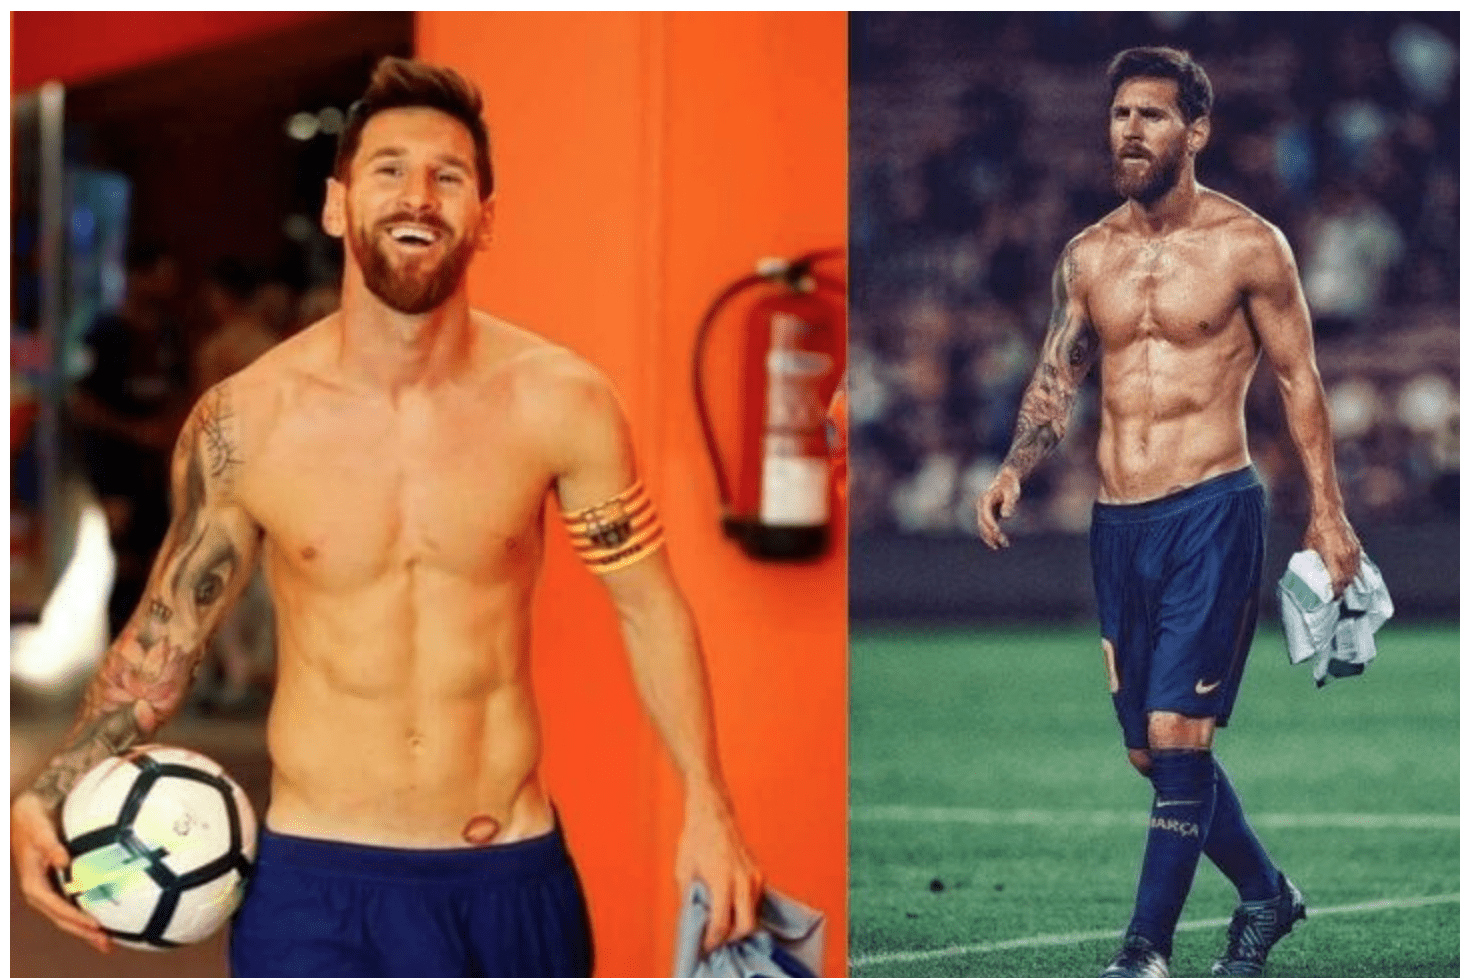 Lionel Messi Workout Routine What does Lionel Messi’s workout routine look like? 